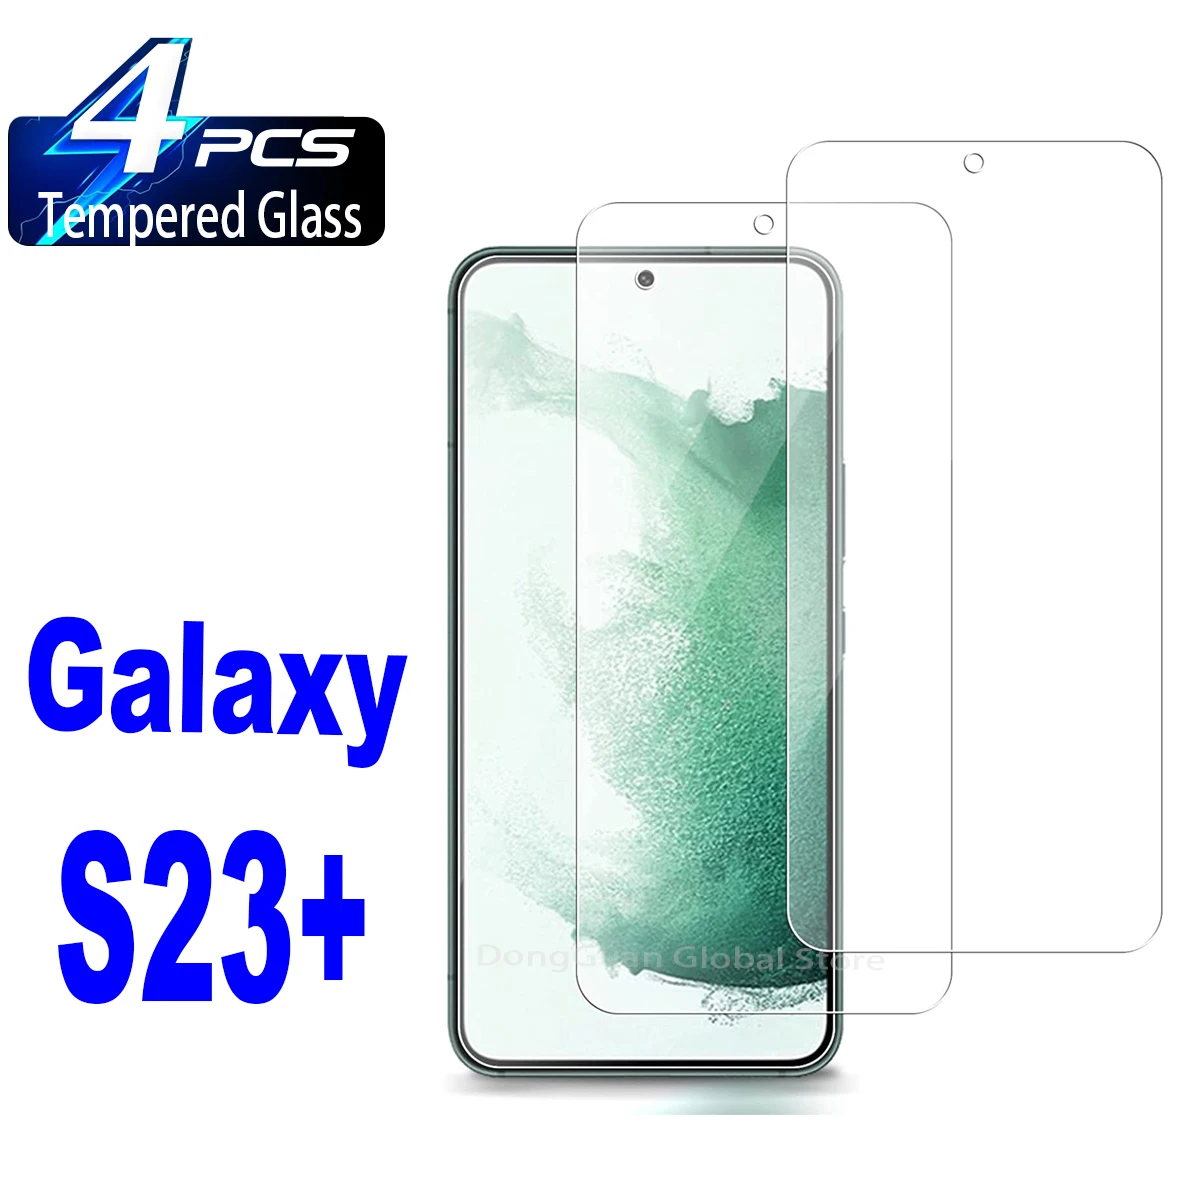 1/4Pcs Tempered Glass For Samsung Galaxy S23+ Screen Protector Glass Film 2 4pcs tempered glass for samsung galaxy a51 screen protector glass film